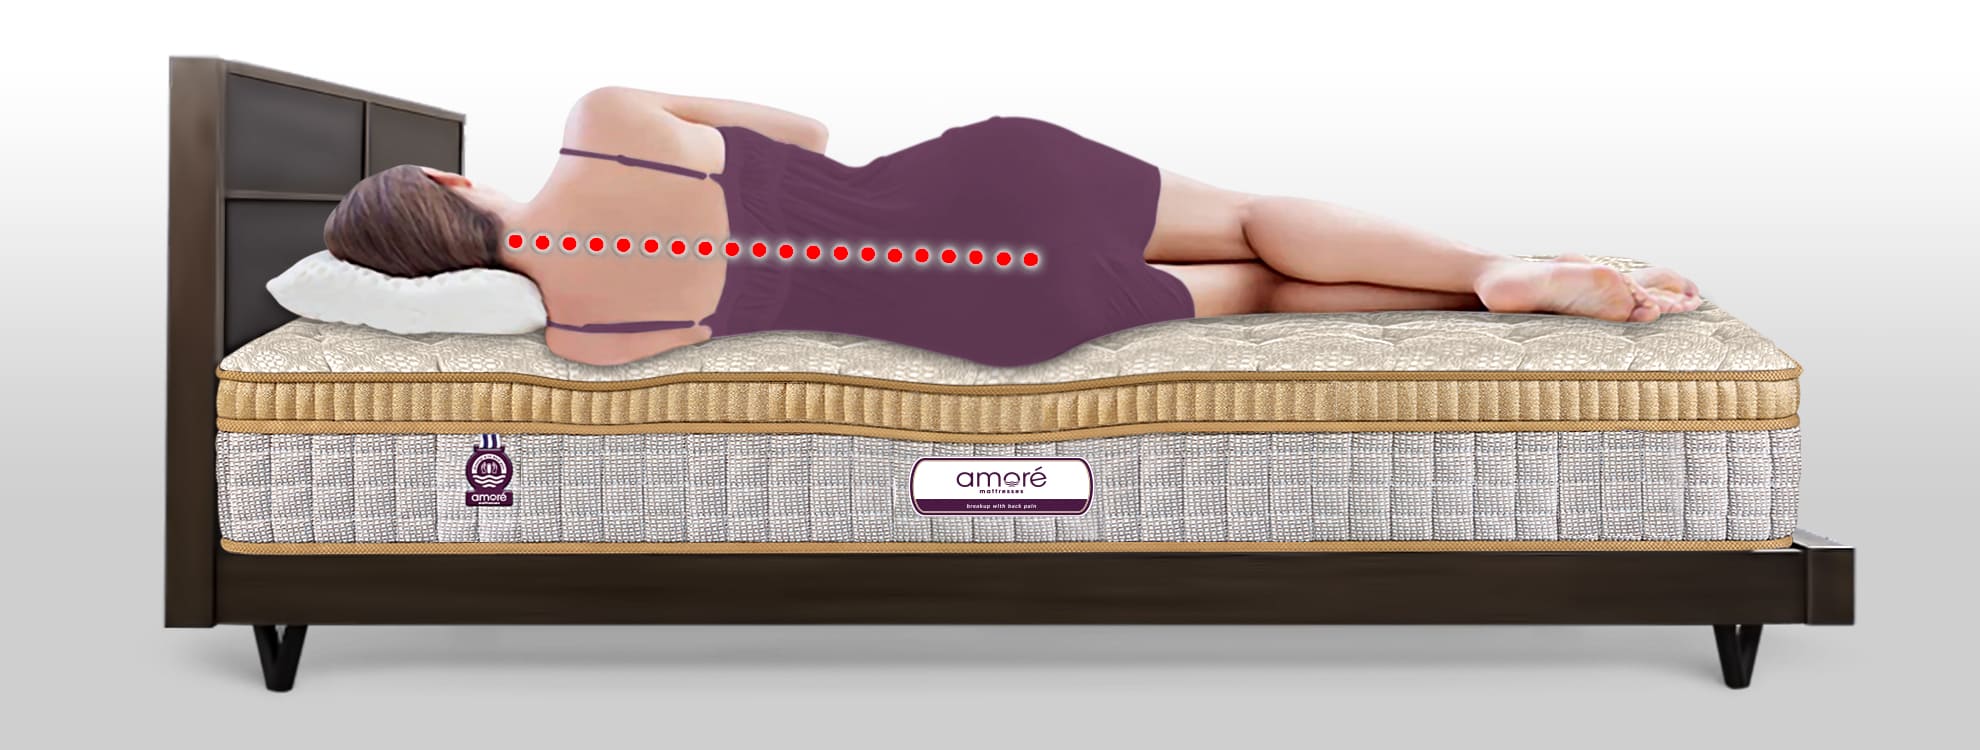 What Are The Benefits of Sleeping on Spring Mattress